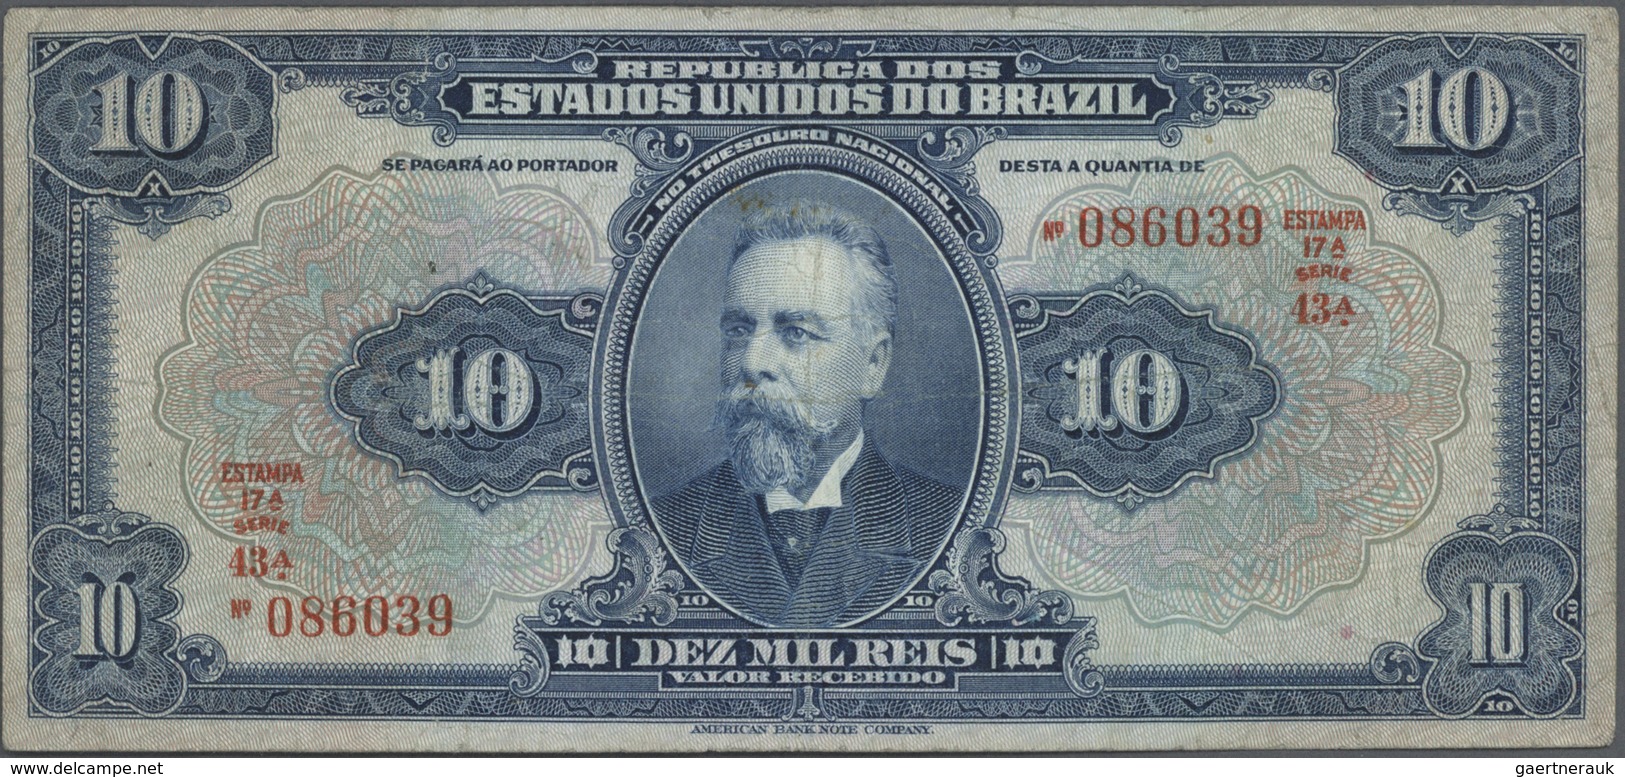 Brazil / Brasilien: large lot of about 750 banknotes containing for example 3x 500 Reis P. 1d, 20 Re